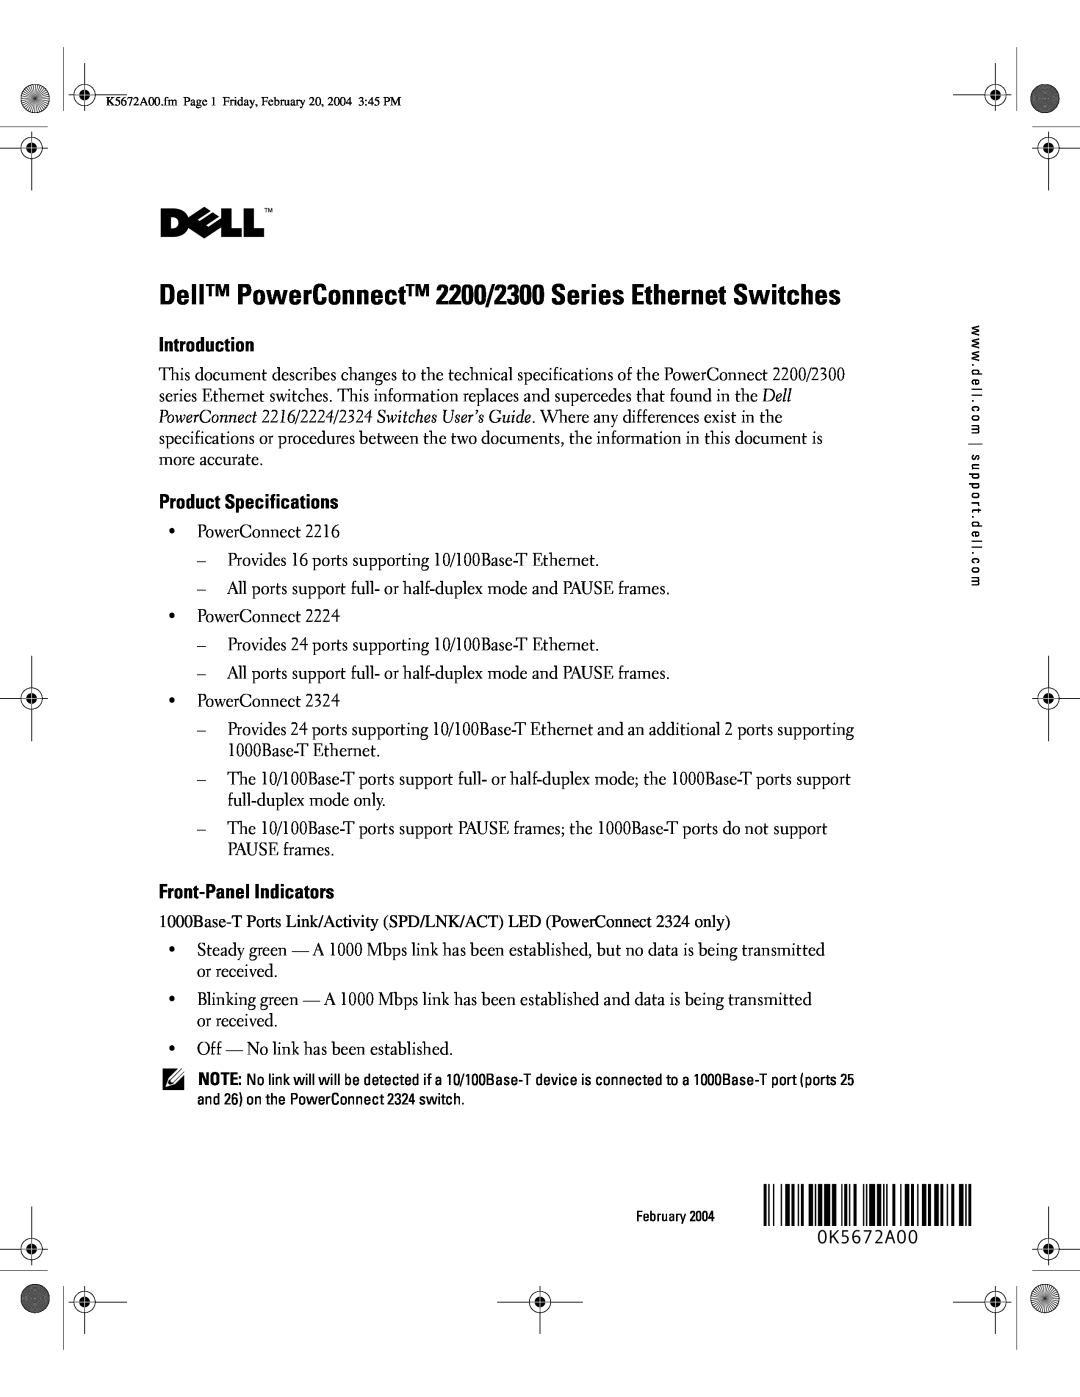 Dell 2200, 2300 specifications Introduction, Product Specifications, Front-Panel Indicators, 0K5672A00 